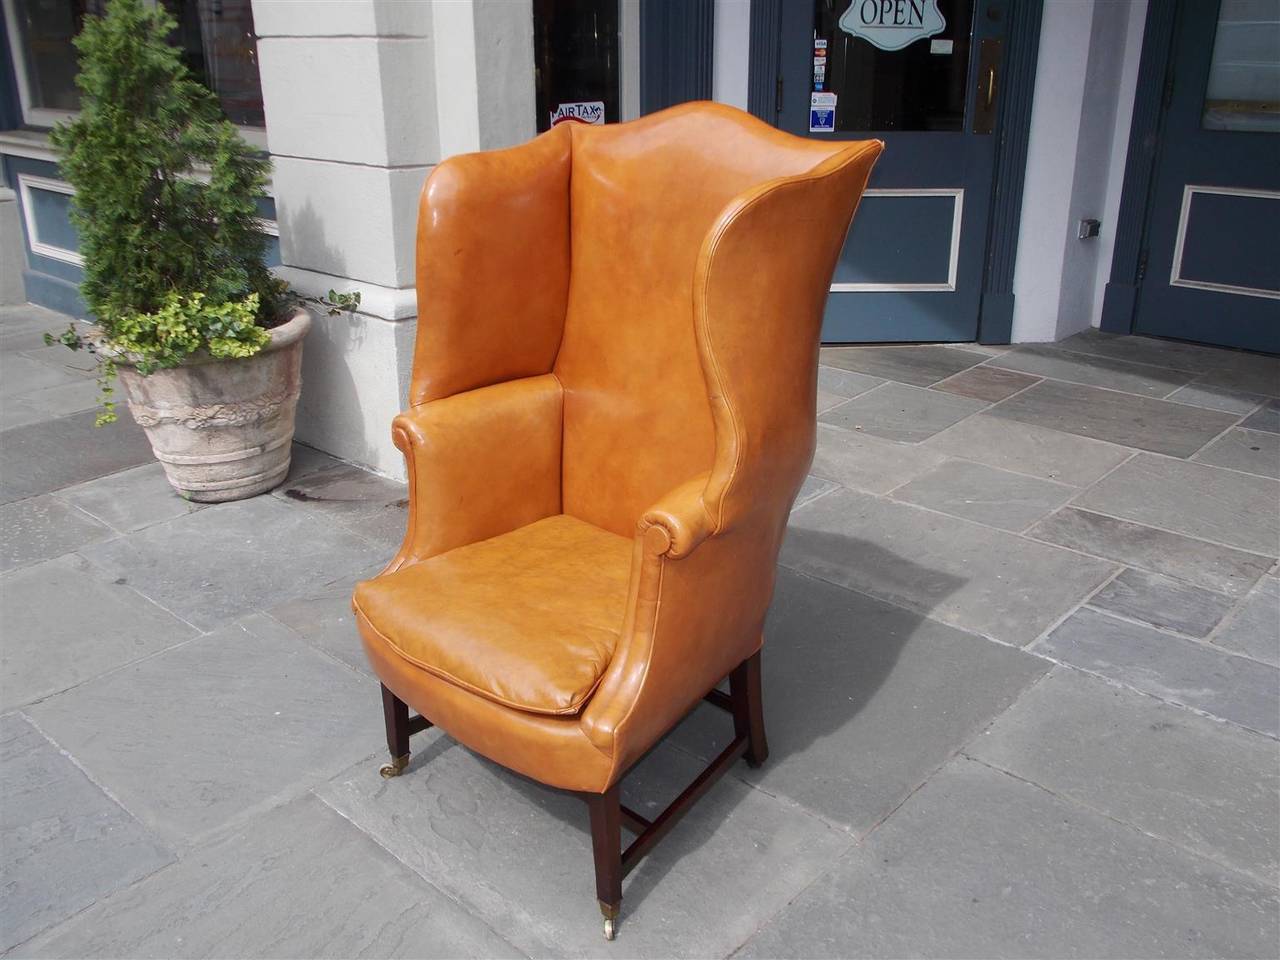 English mahogany caramel leather serpentine wing back armchair with front tapered and rear splayed legs, cross stretchers, and original brass cup casters. Late 18th Century.